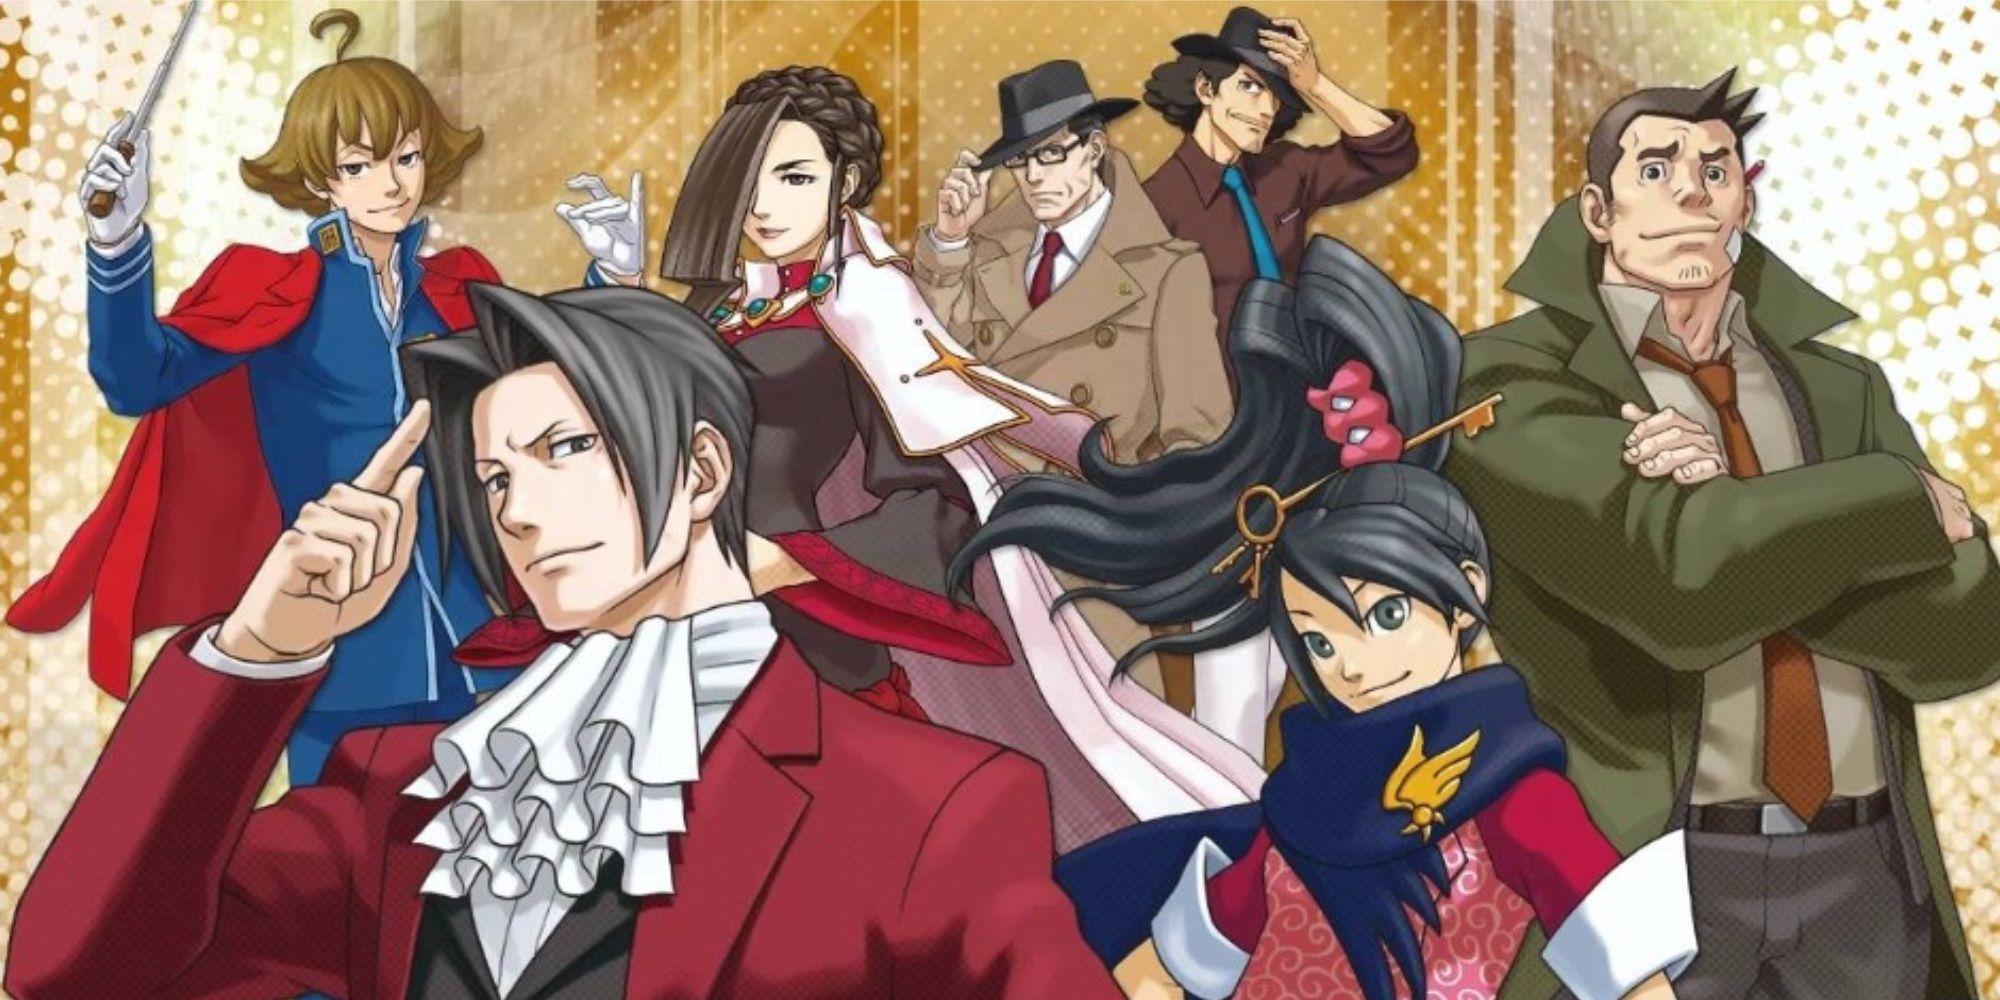 All the characters from Ace Attorney Investigations 2 standing together